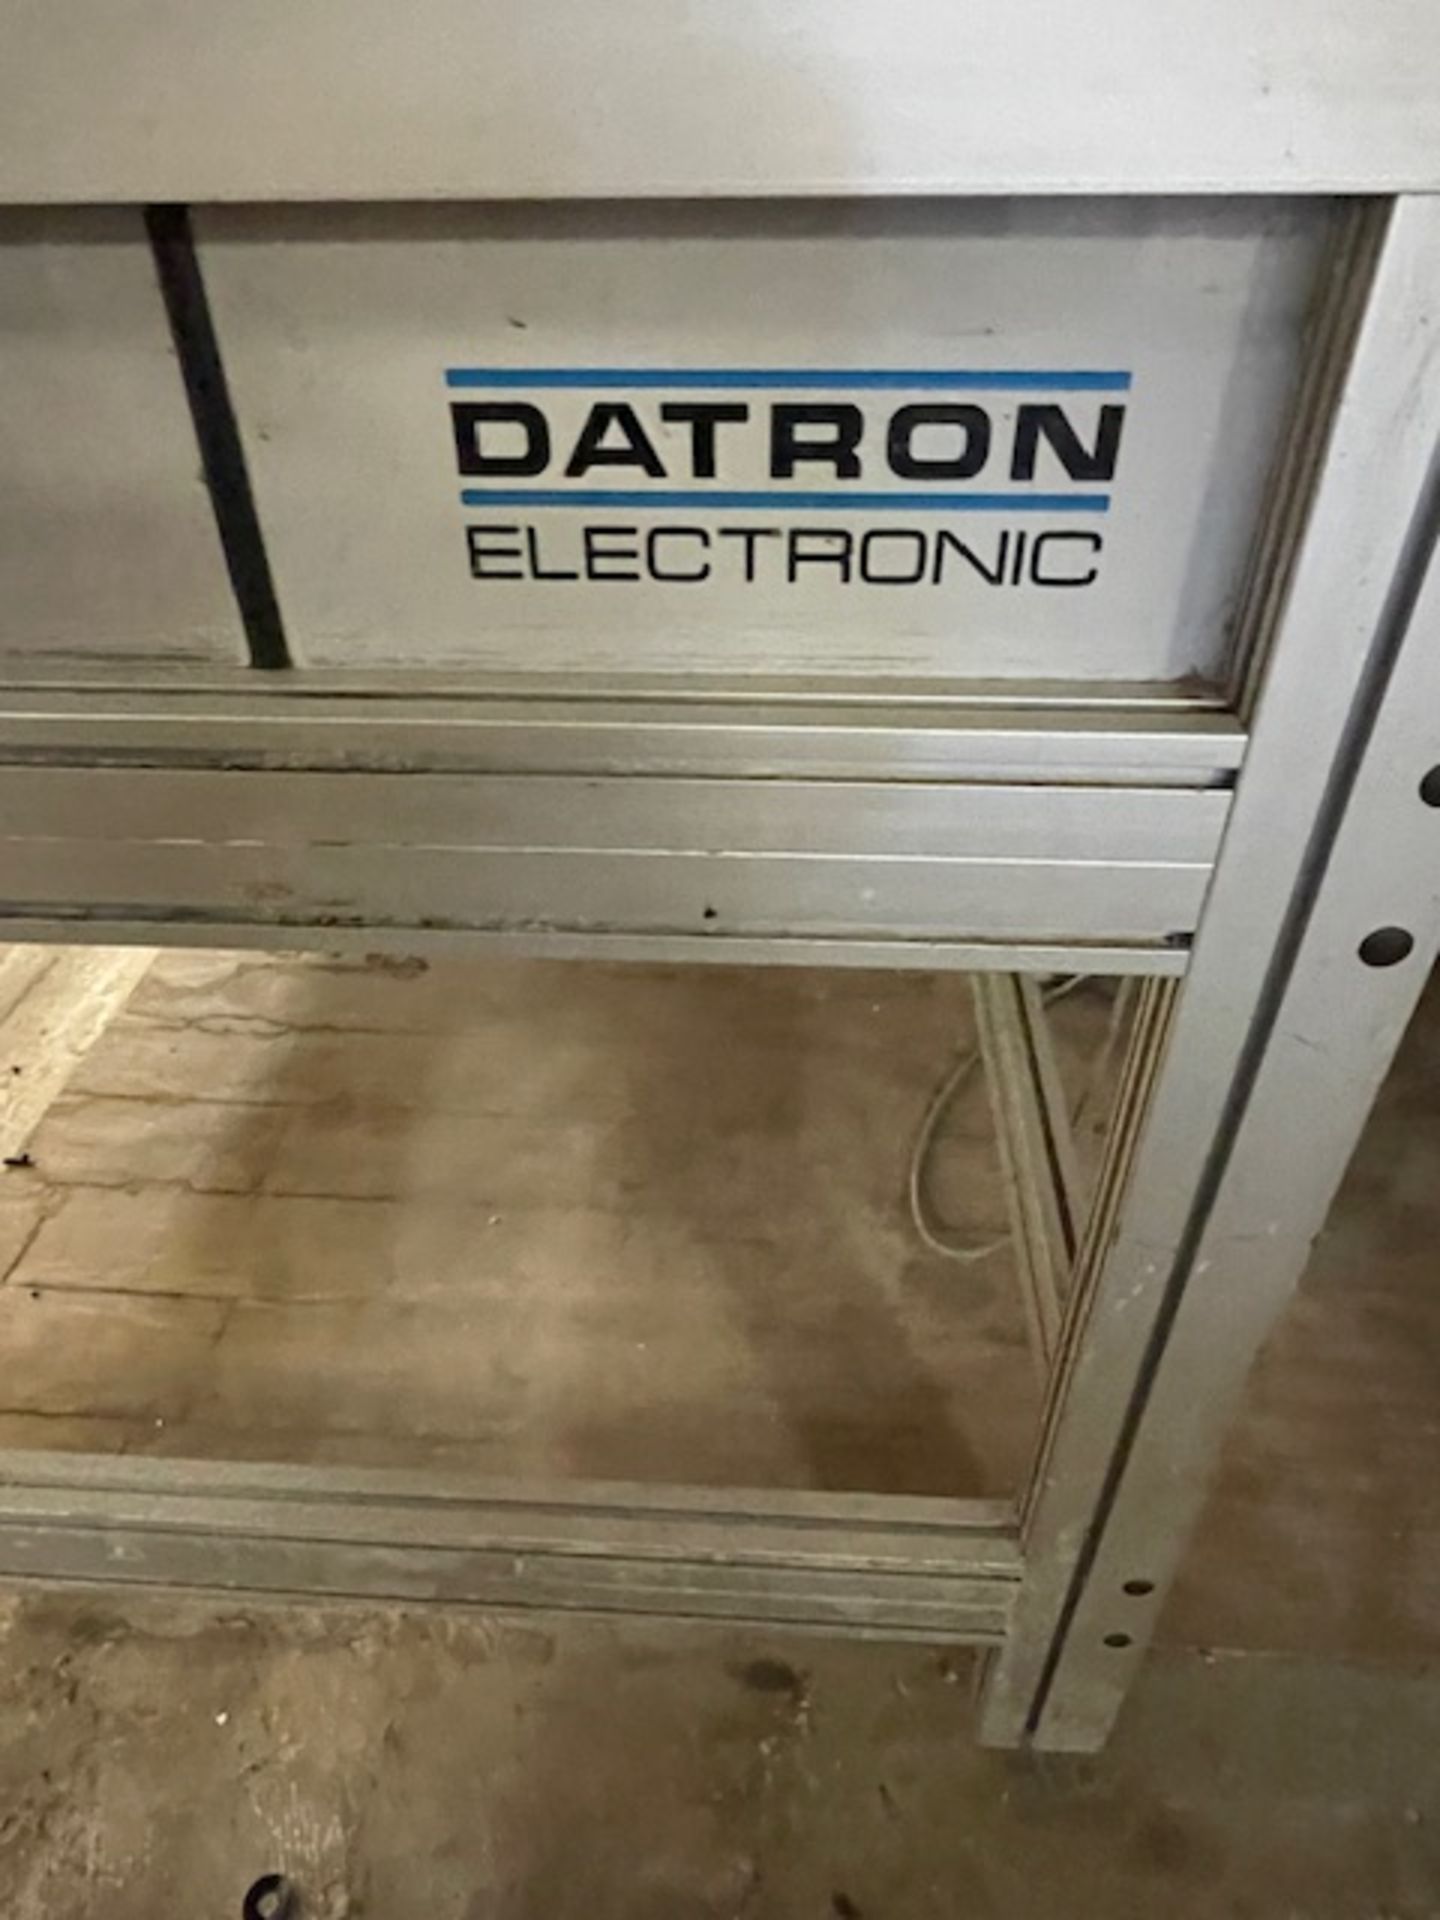 Datron XJ2 CNC Mill (750x500mm cap) (Location: Earls Barton. Please Refer to General Notes) - Image 3 of 3